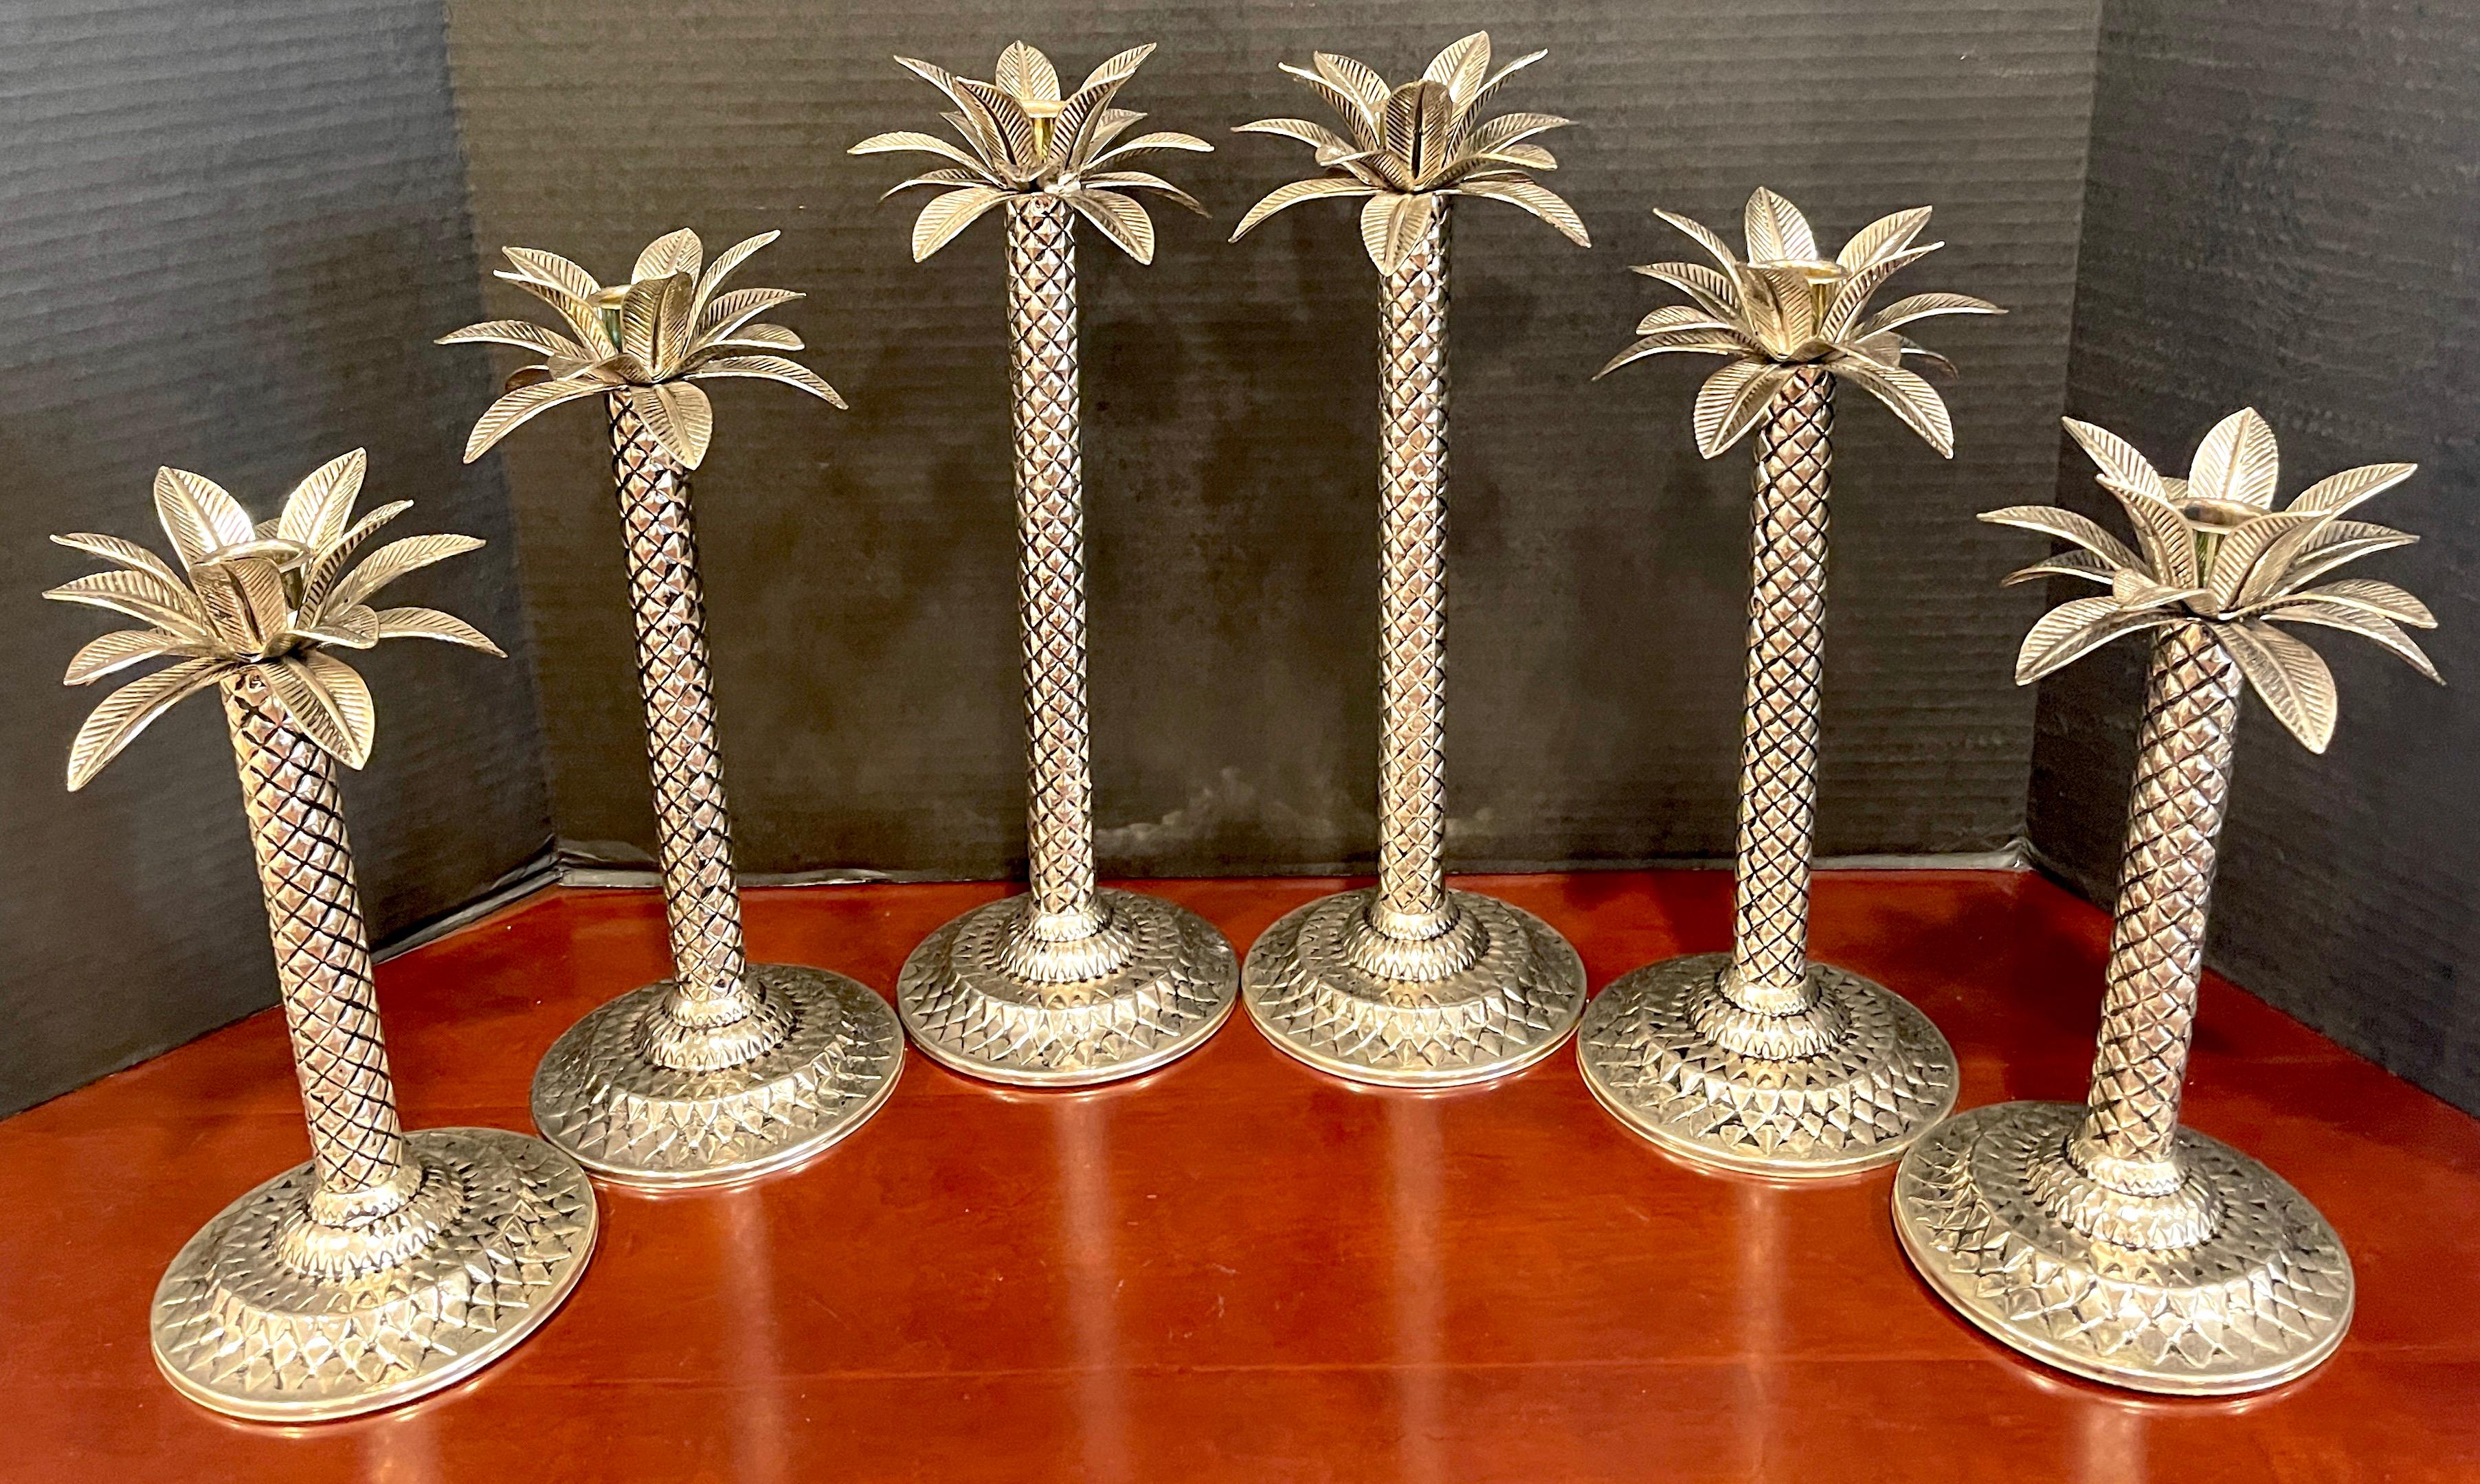 Six Hollywood Regency style silverplated palm tree candlesticks
Consisting of three pairs of tapering realistically cast and modeled pairs of palm tree candlesticks.
The tallest pair is 14